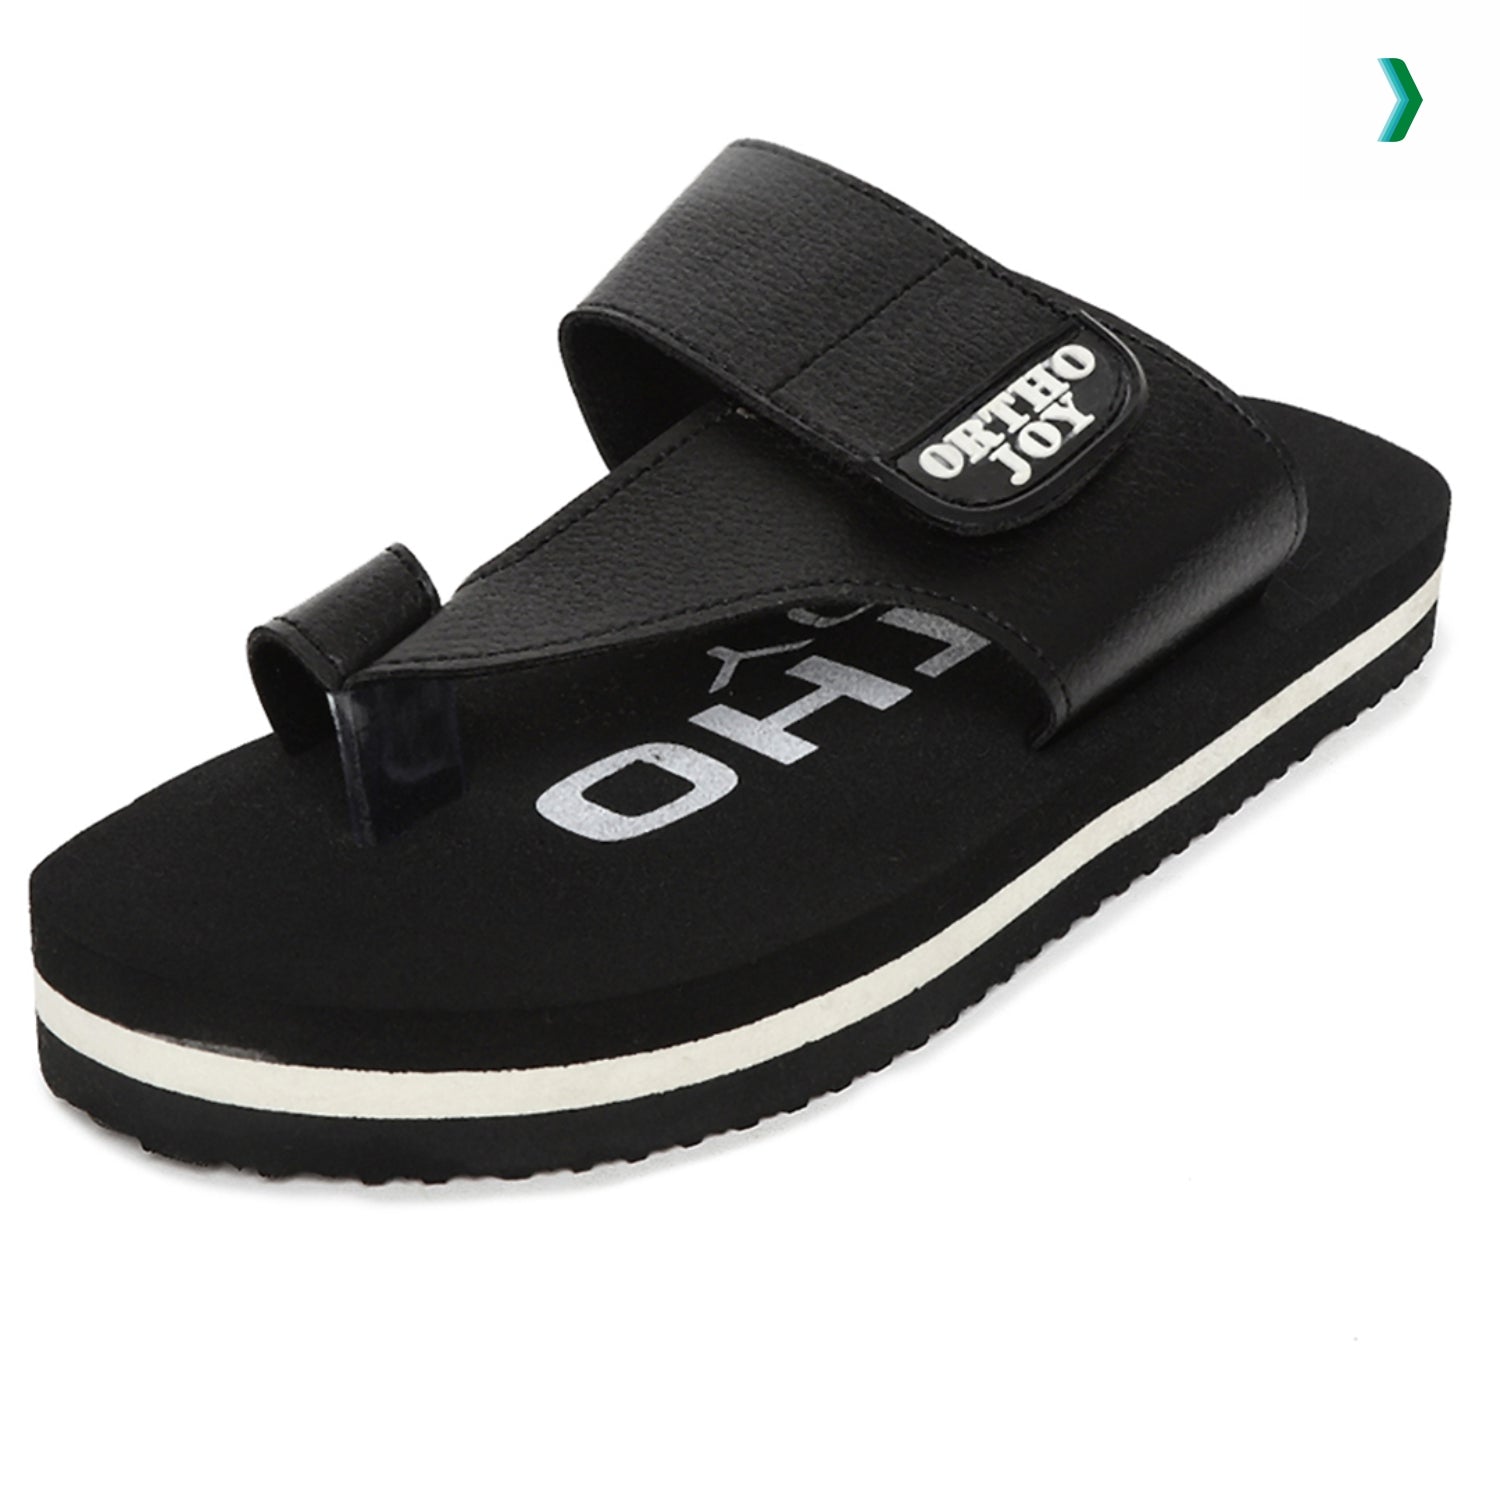 ortho slippers for men, ortho chappal price, best ortho slippers for men, ortho slippers for gents, ortho slippers, ortho chappal, orthopaedic slippers, orthopaedic chappals, doctor soft chappal, soft slipper, soft slippers for men, Extra Soft Doctor Ortho Slippers, Extra Soft Slippers, doctor ortho slippers, doctor ortho slippers for men